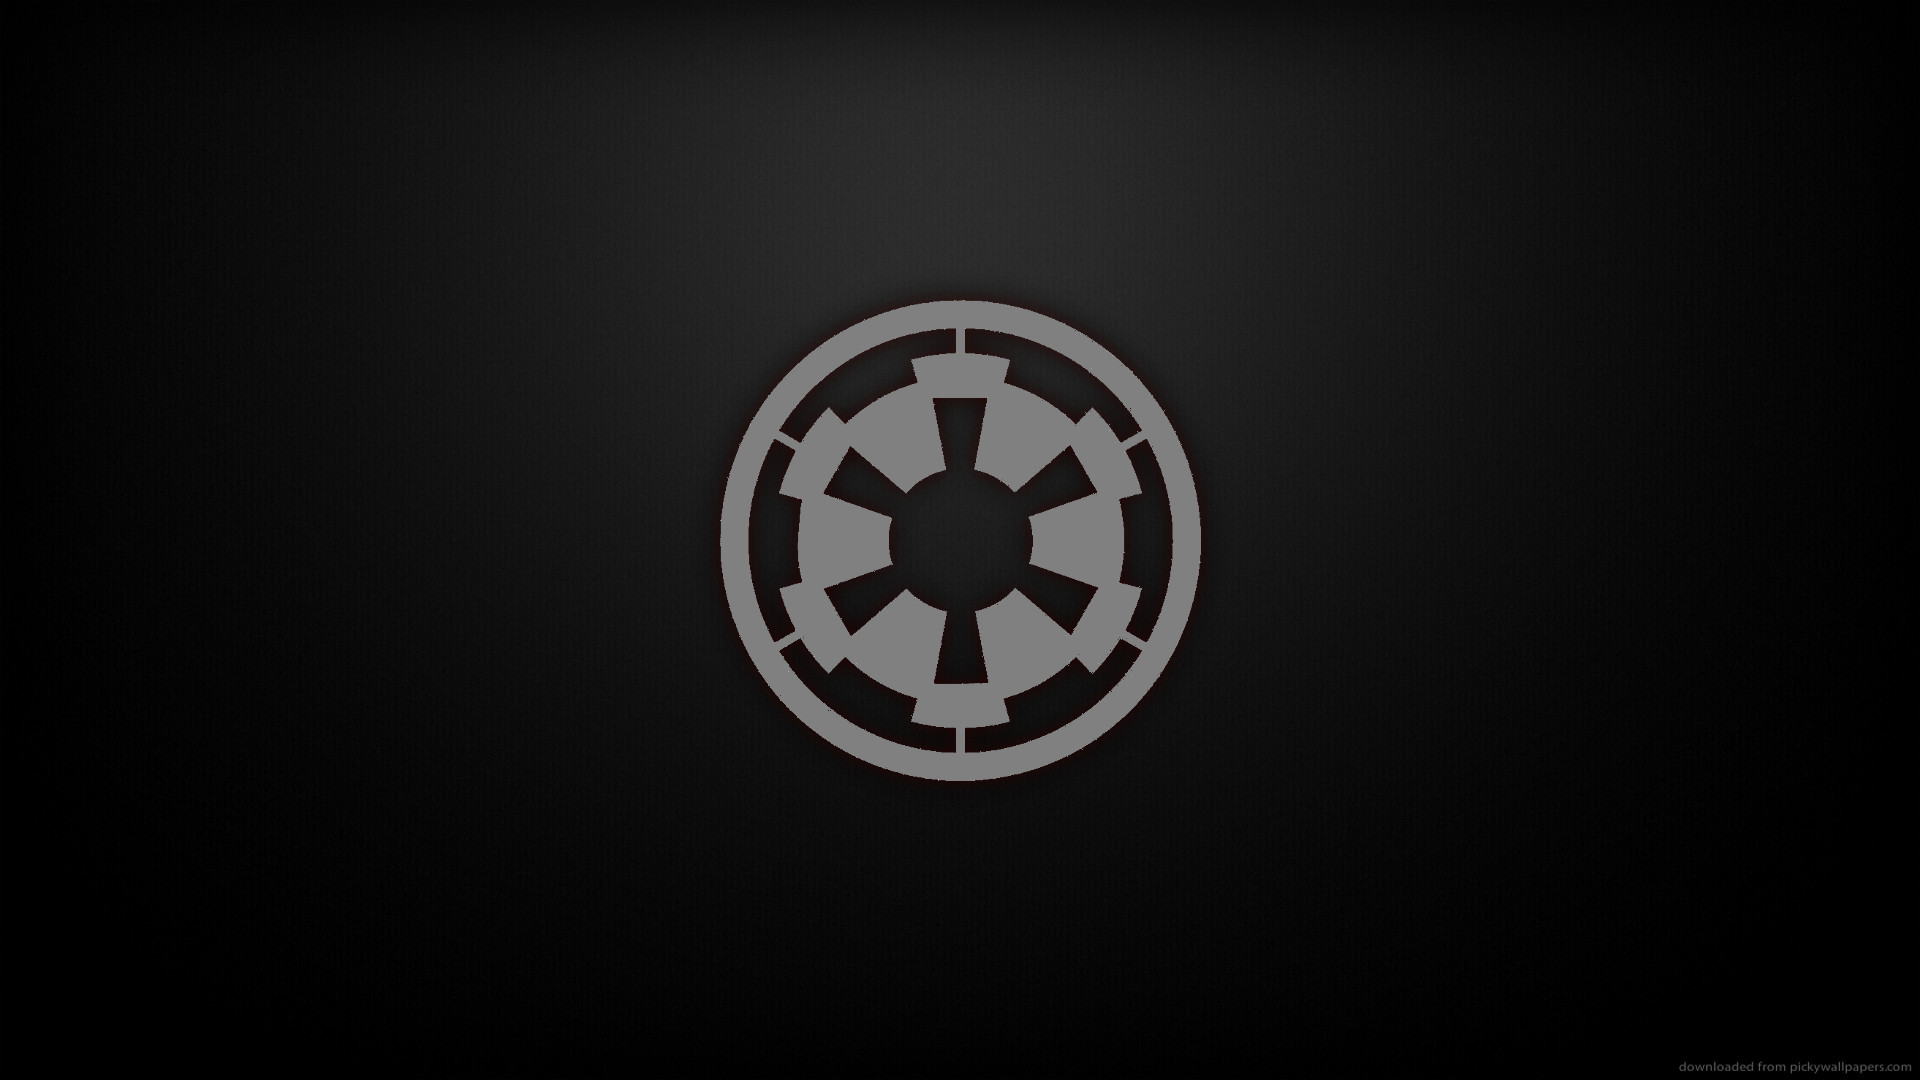 1920x1080 ... star wars imperial symbol wallpaper by hd wallpapers daily ...